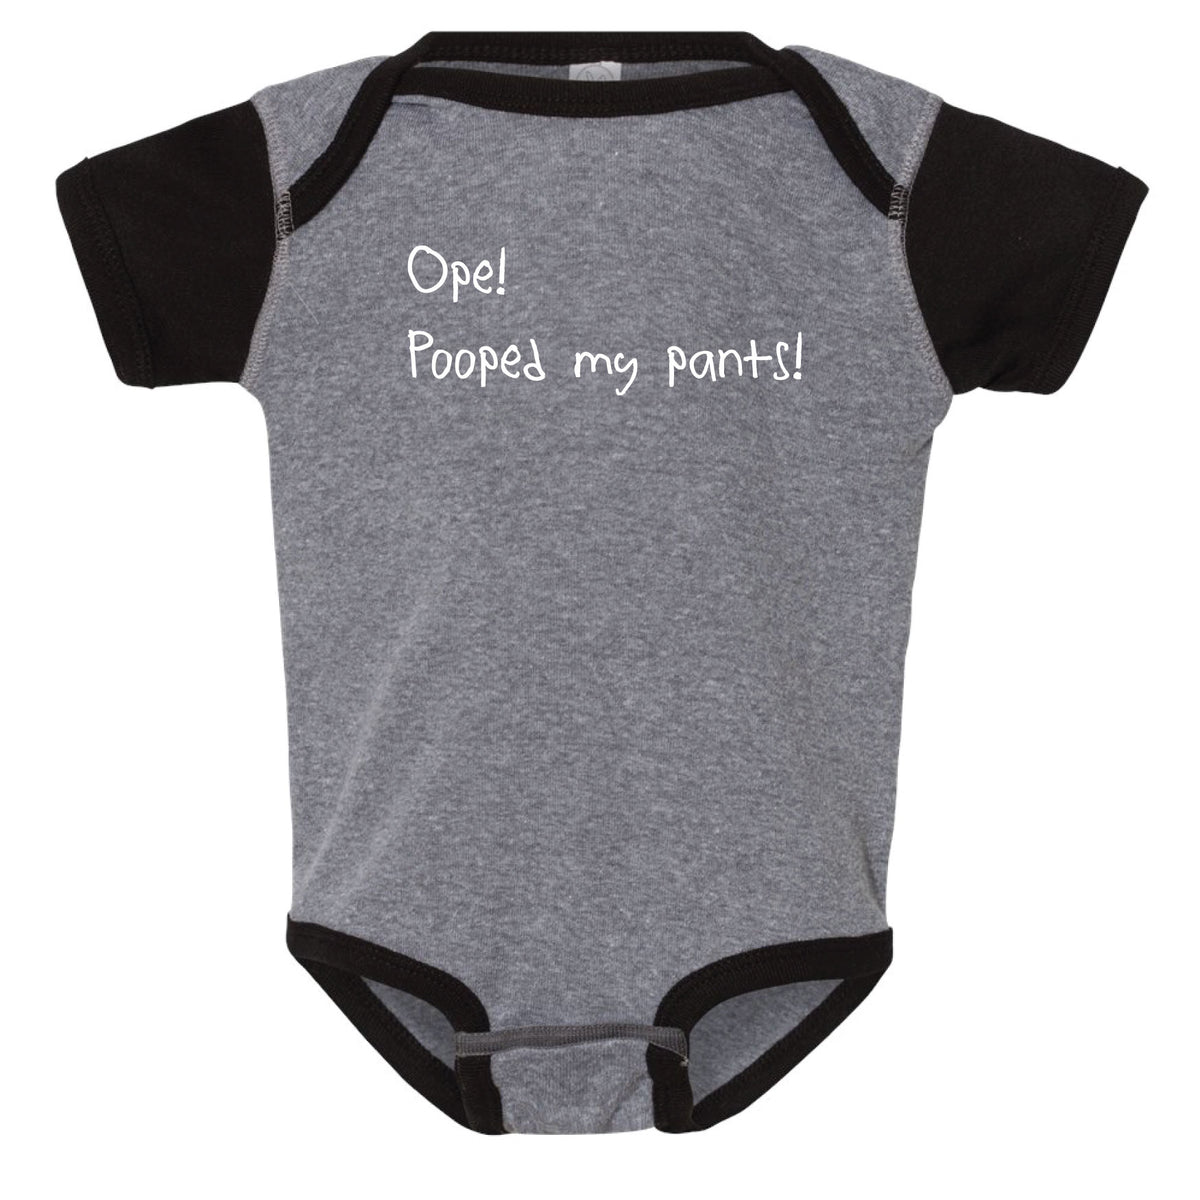 PIMP Poop in My Pants Funny Baby One Piece Funny Gift Body Suit